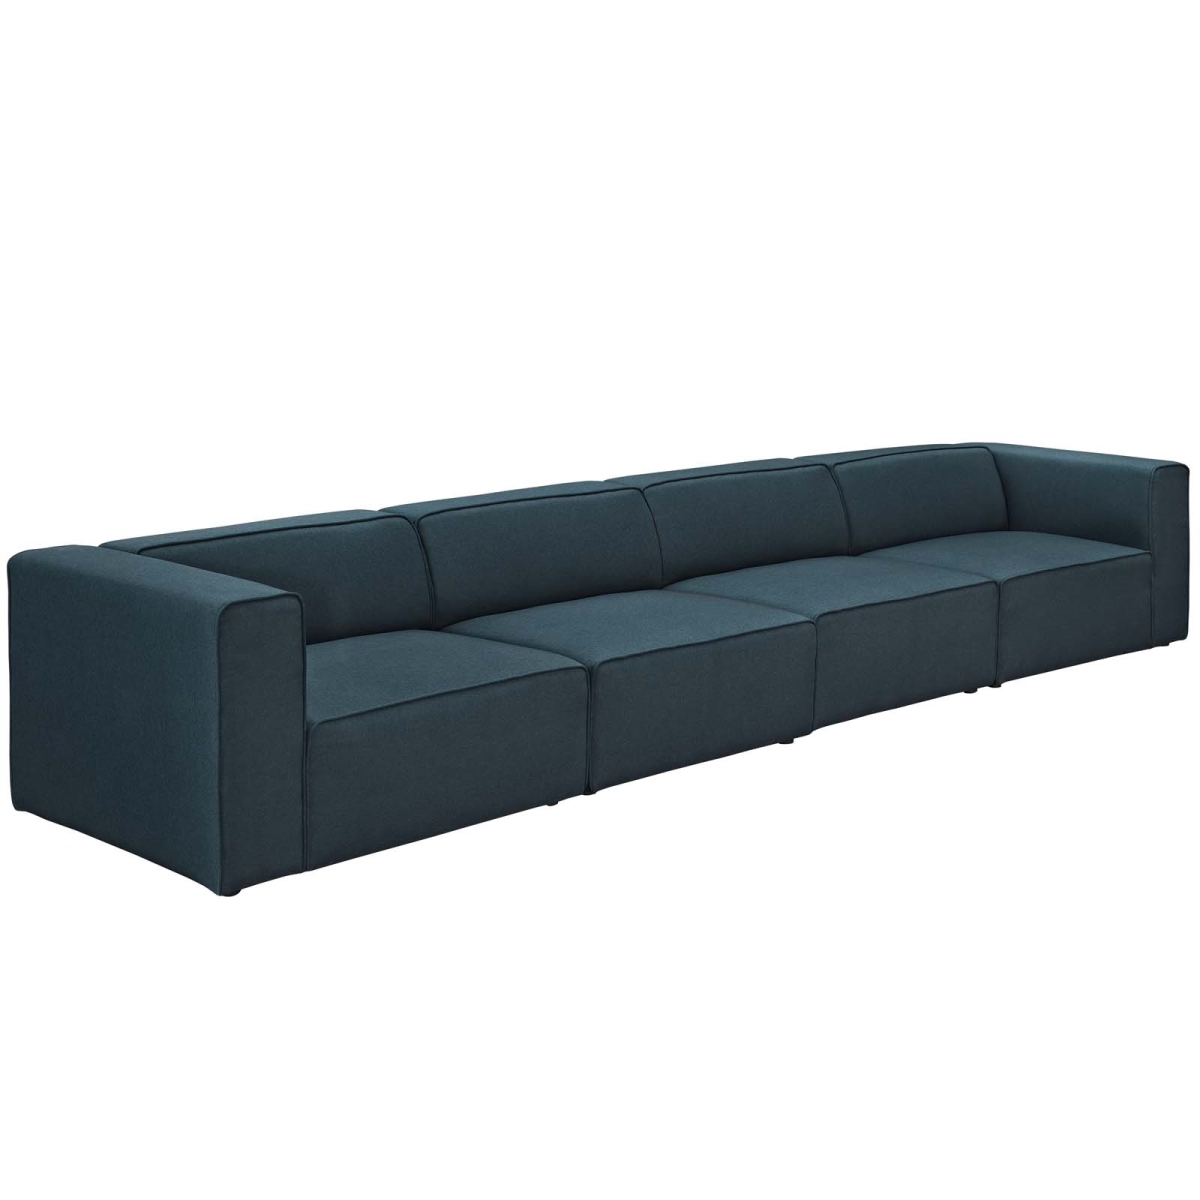 Eei-2829-blu 4 Piece Mingle Upholstered Fabric Sectional Sofa Set - Blue, 27 X 156 X 37 In.